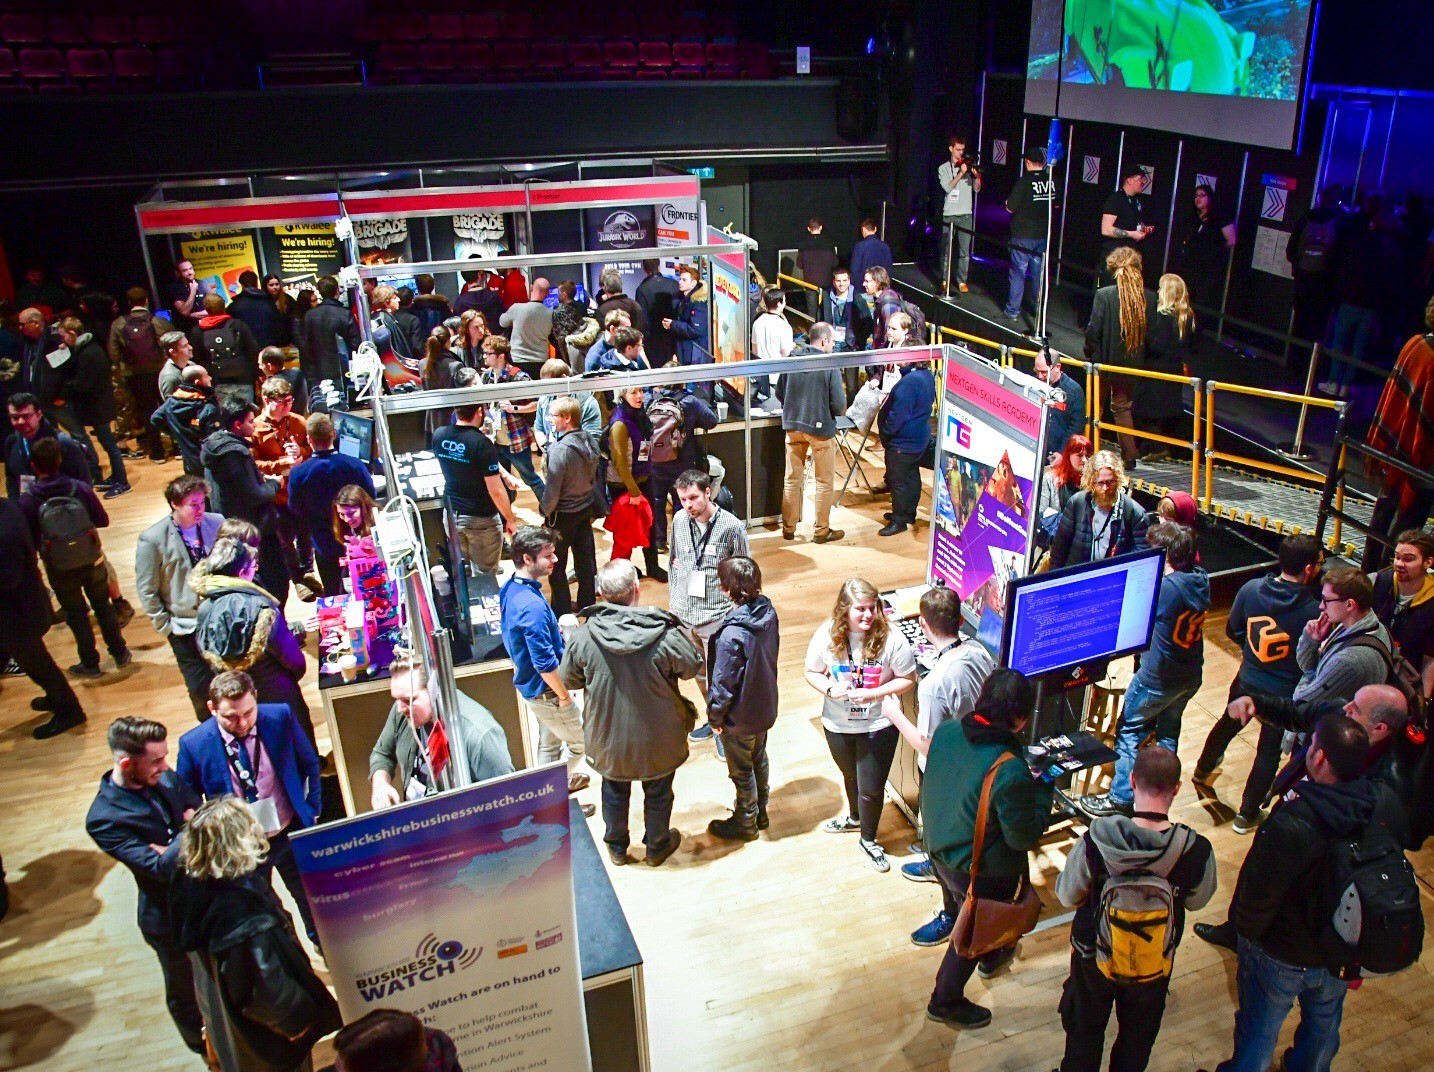 An aerial shot of the exhibition area or the Interactive Futures conference